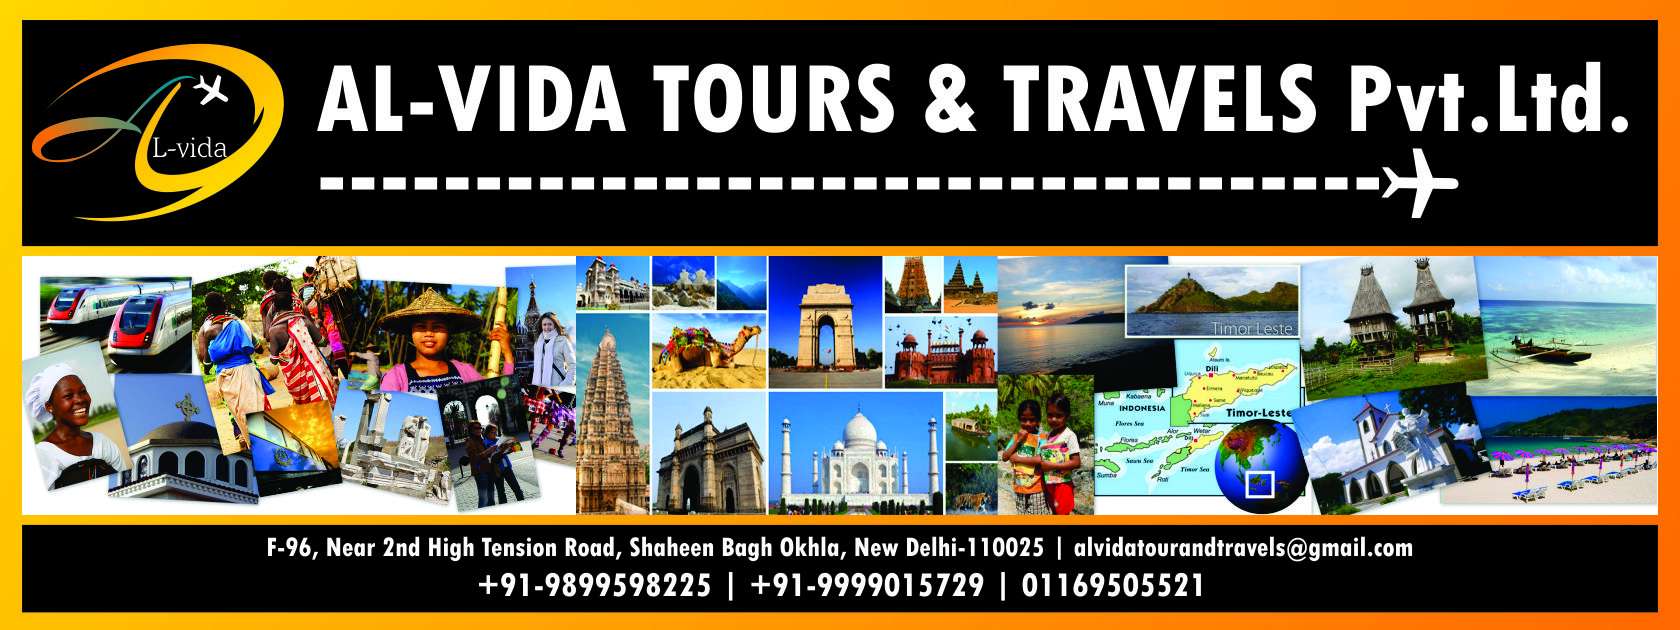 Al-vida Tours And Travels Private Limited